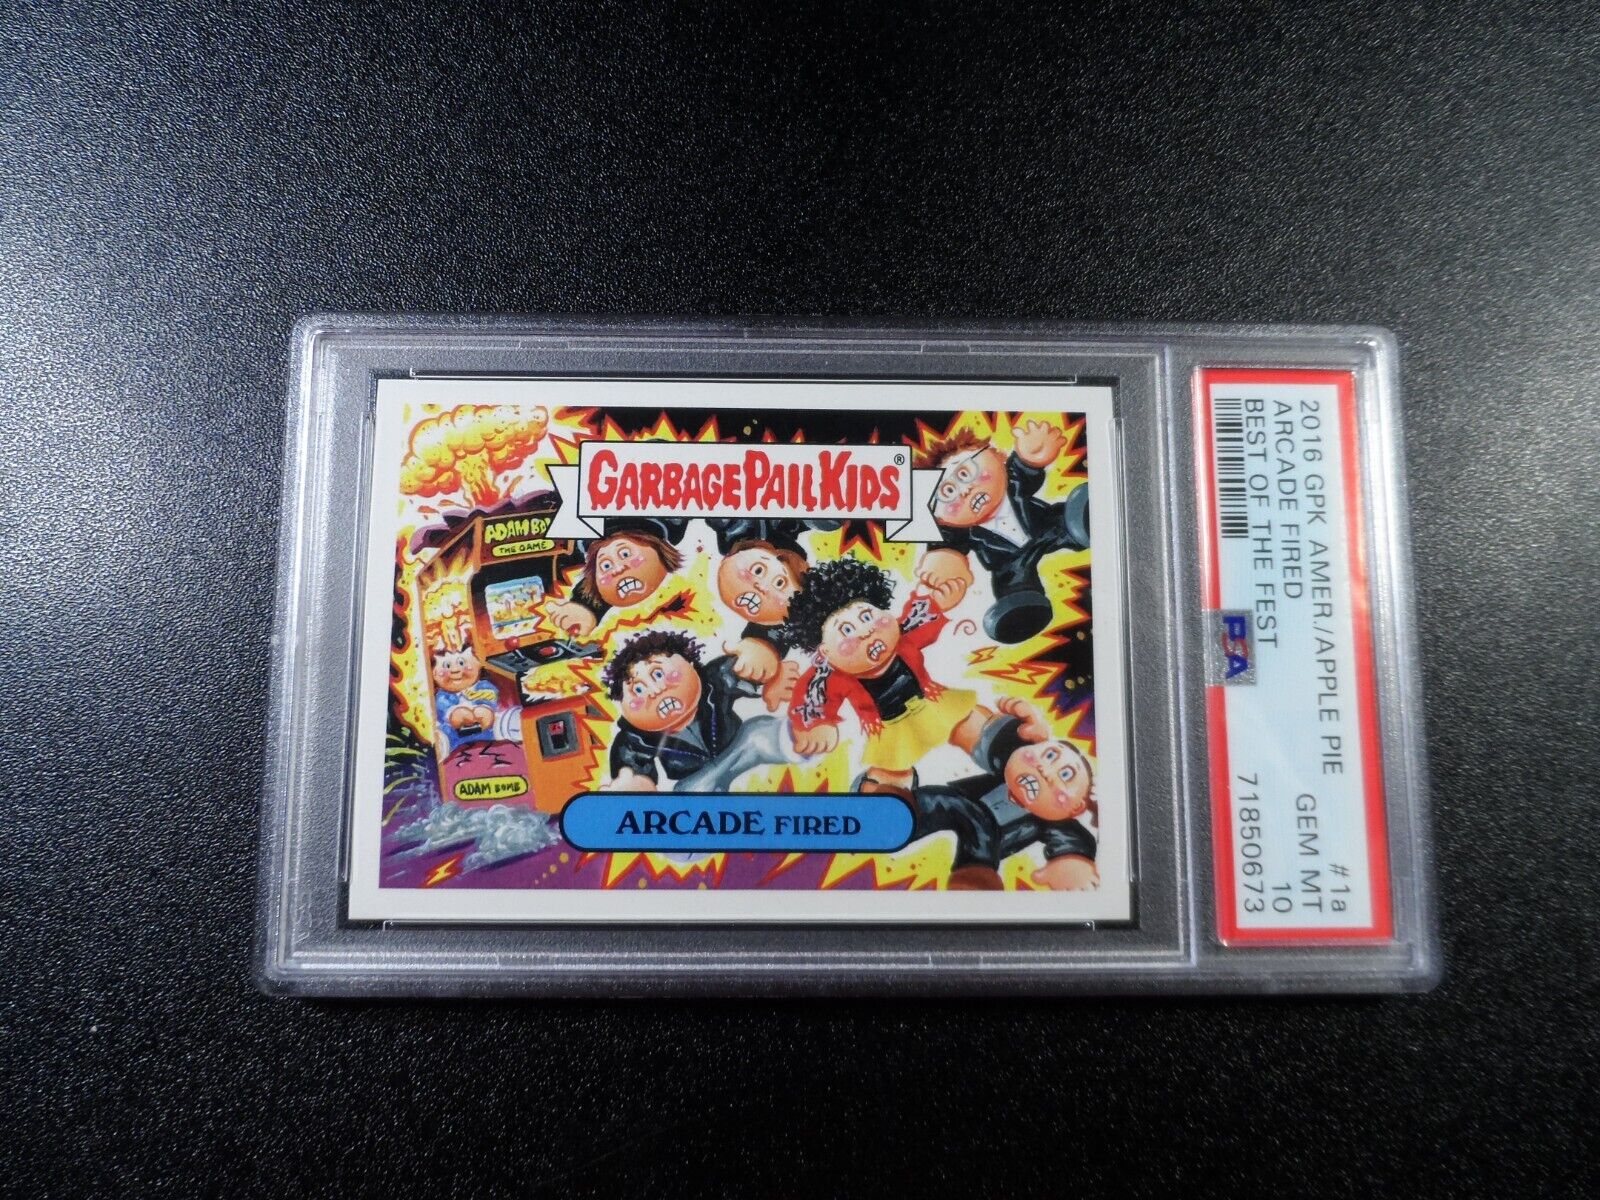 PSA 10 Arcade Fire Spoof Garbage Pail Kids Best of the Fest 16 Adam Bomb Game